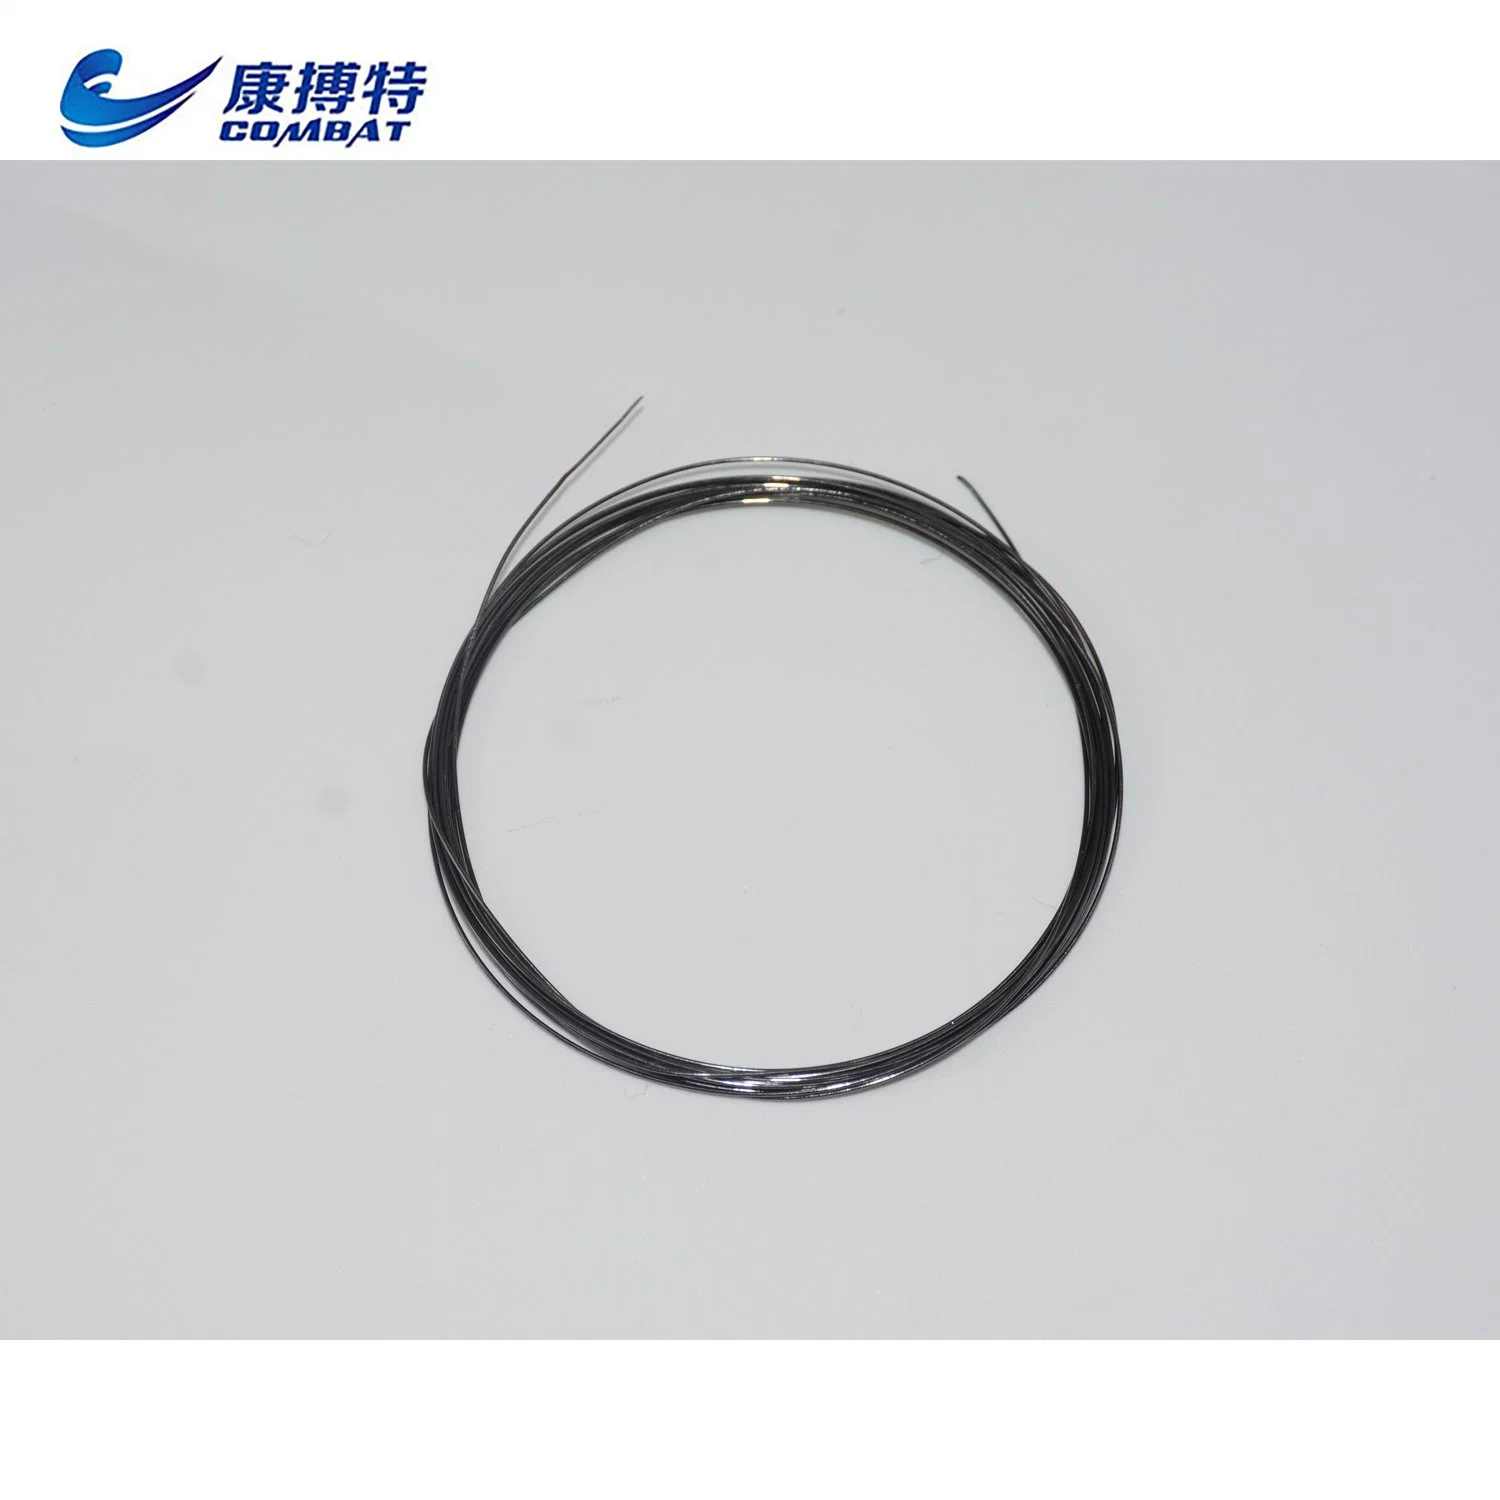 W1 Pure Tungsten Wire for Industry